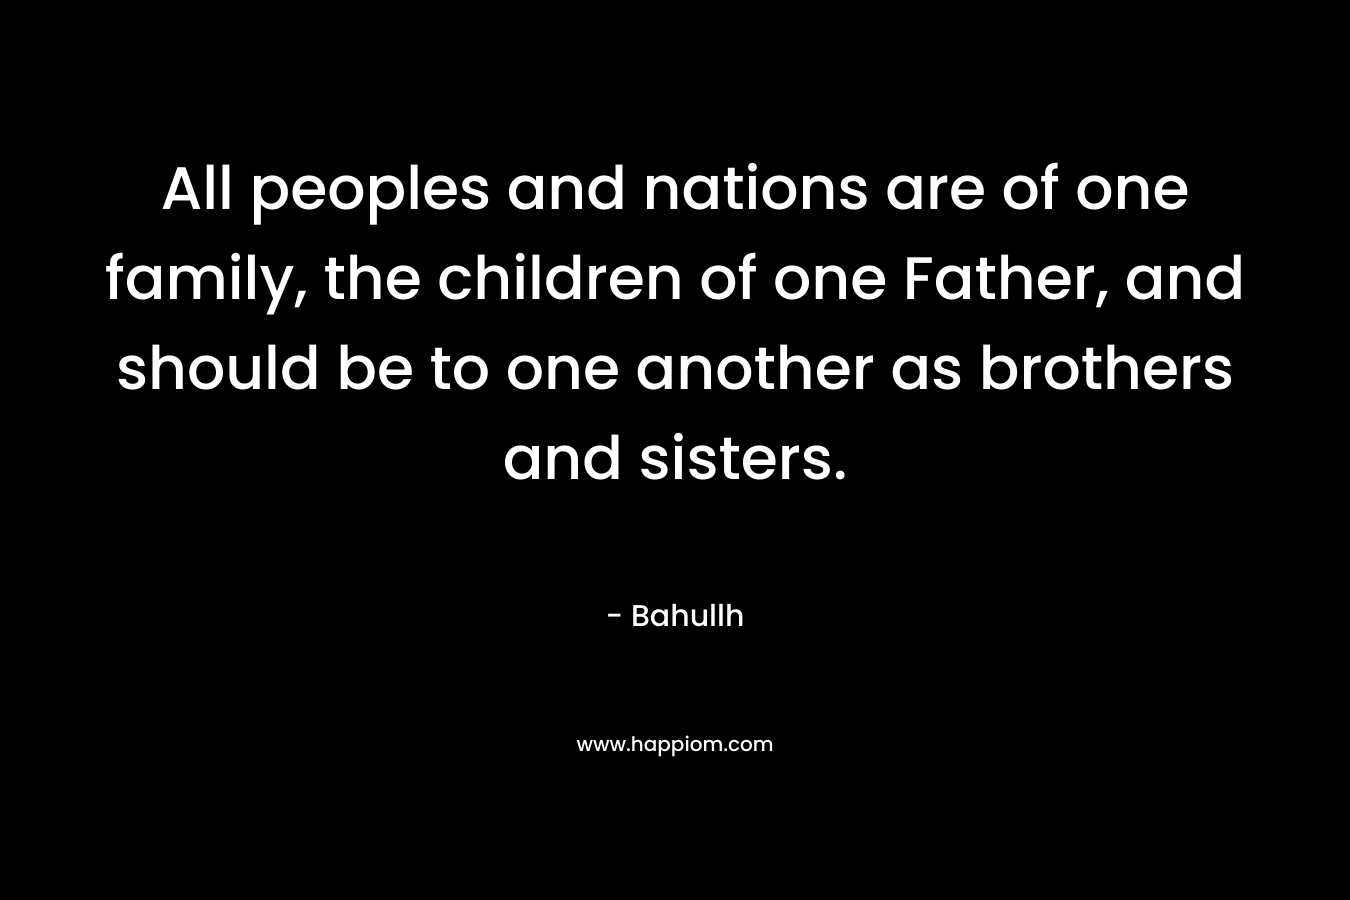 All peoples and nations are of one family, the children of one Father, and should be to one another as brothers and sisters. – Bahullh